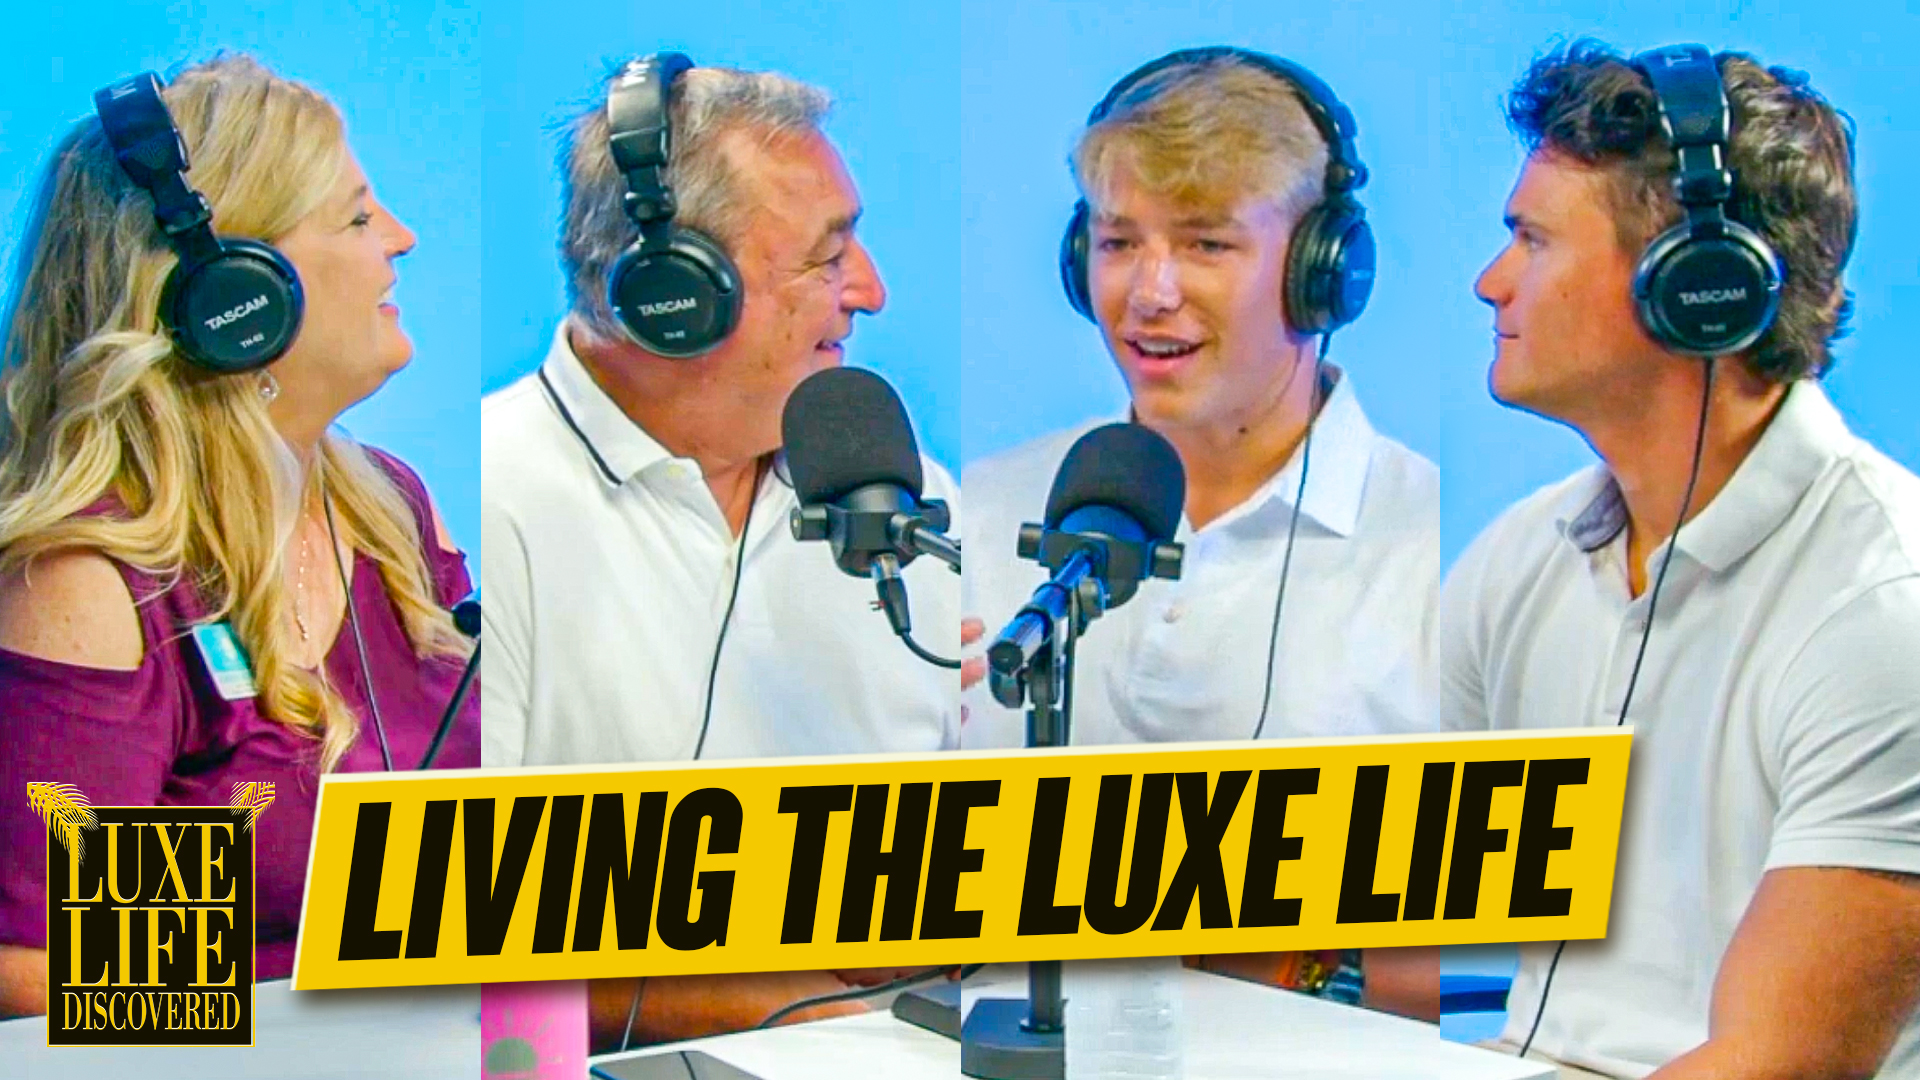 30A MEDIA Picks Up “Luxe Life Discovered” Podcast Broadcasts and Channel Development